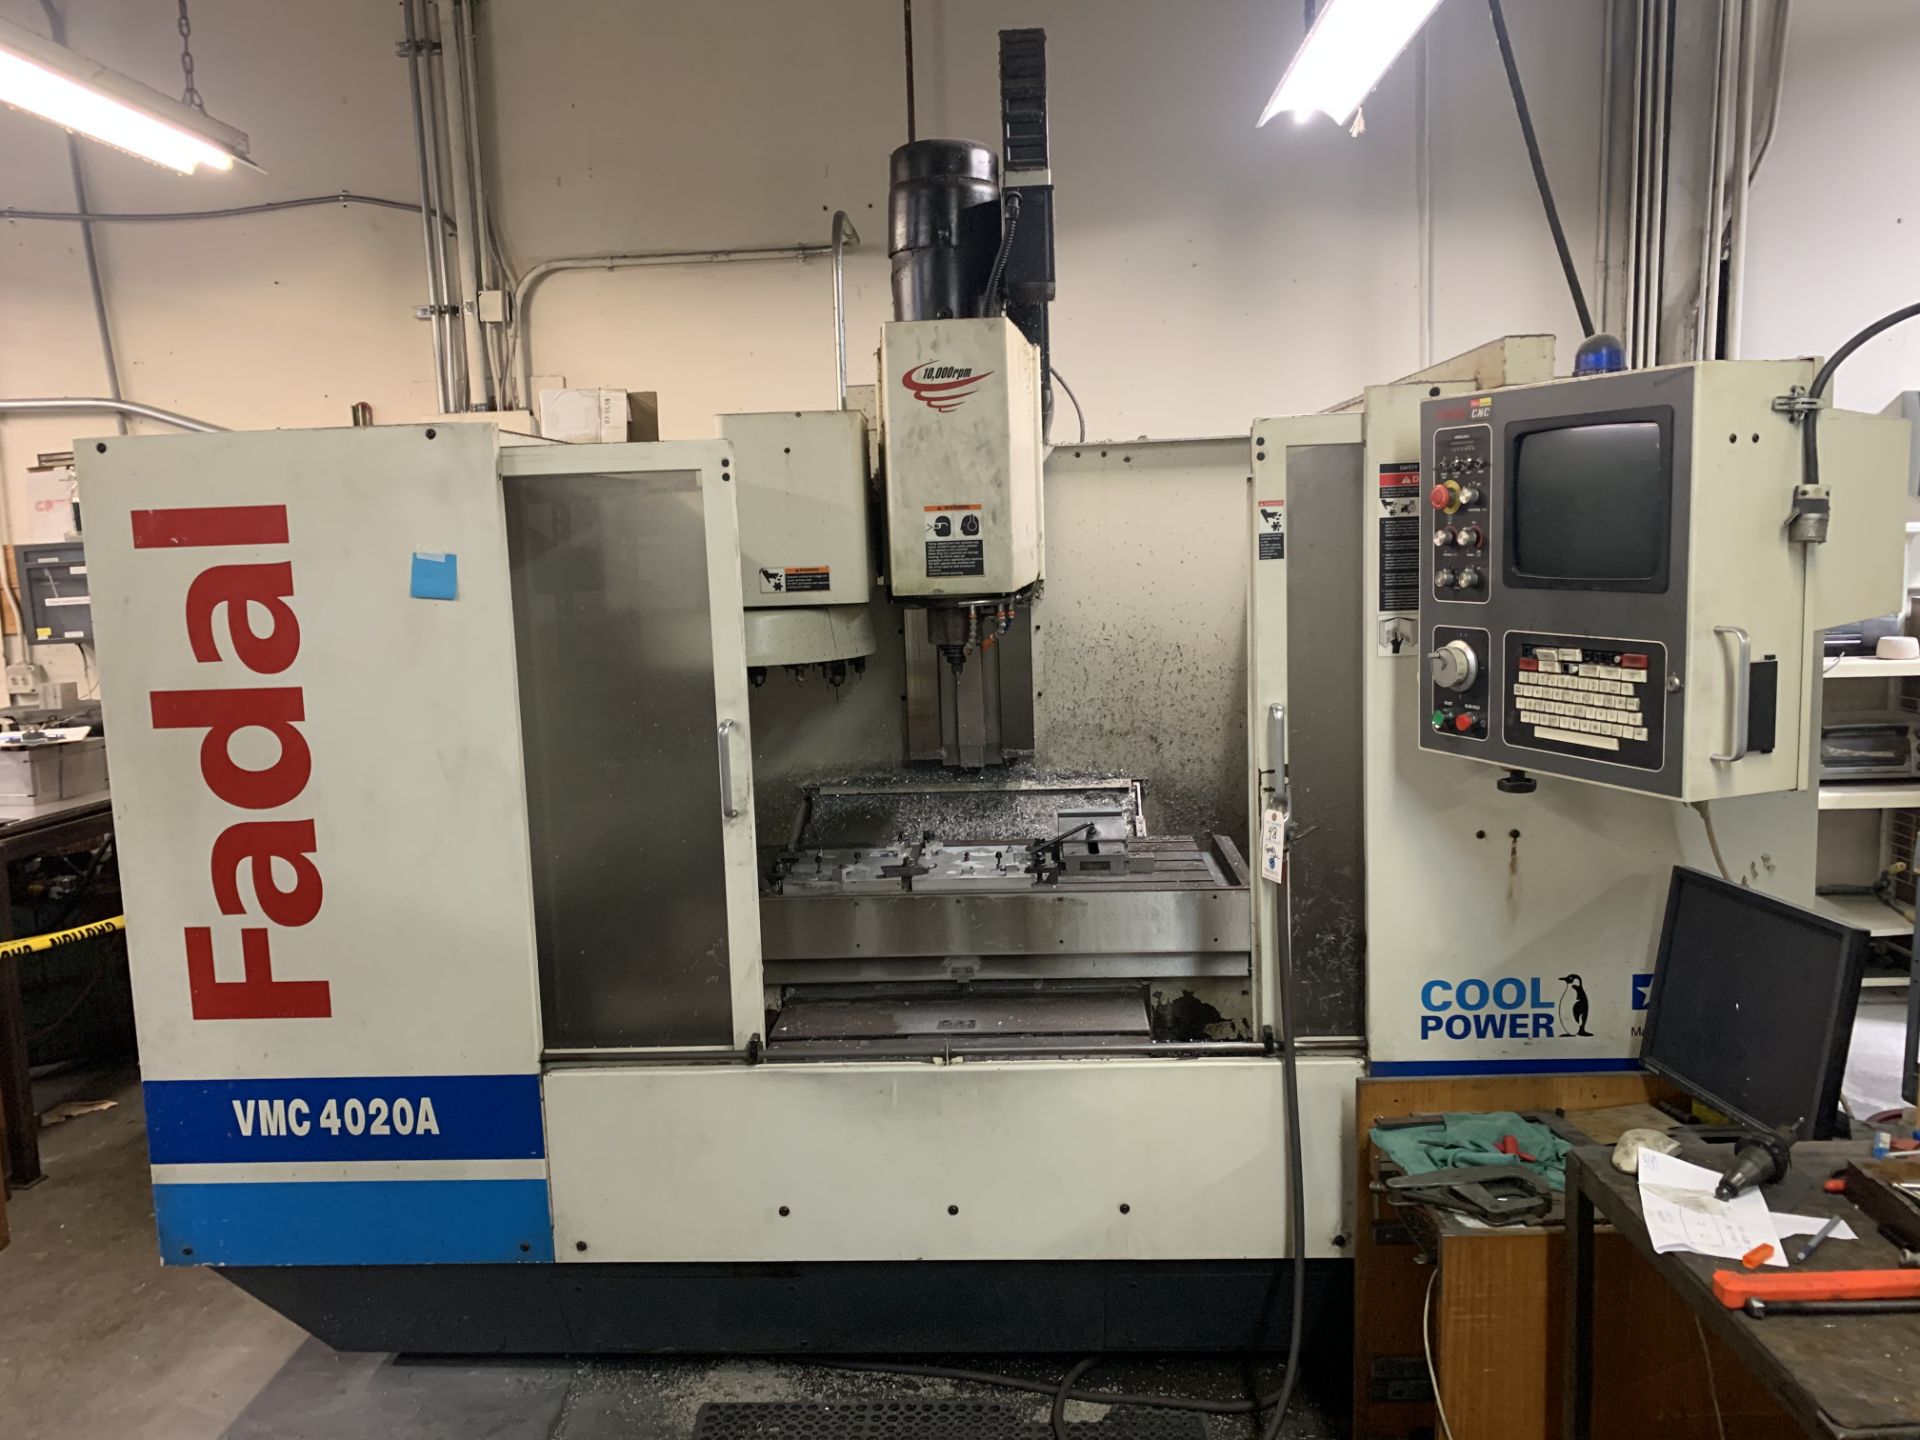 2001 Fadal VMC #4020A 917-1 CNC Machine, 10,000RPM Water Cooled, Table Size Approx.: 46"L x 20"W,